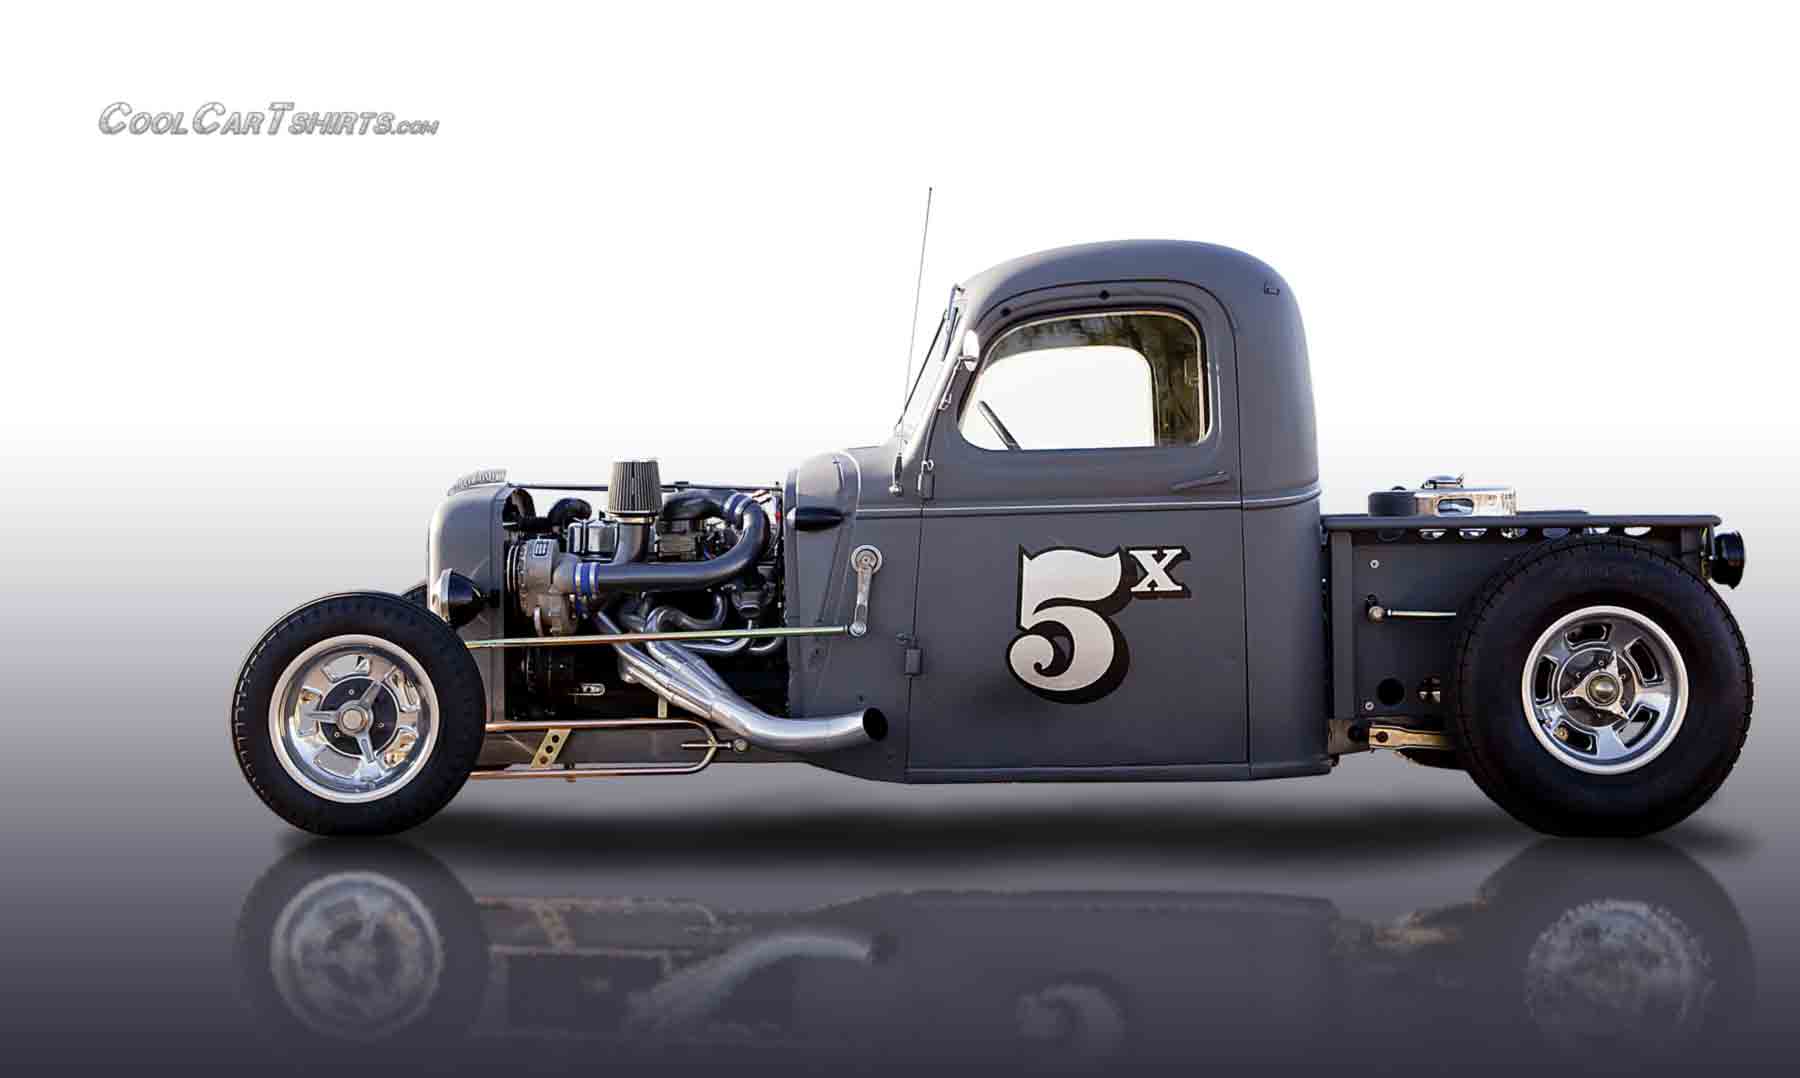 Supercharged Hot Rod truck